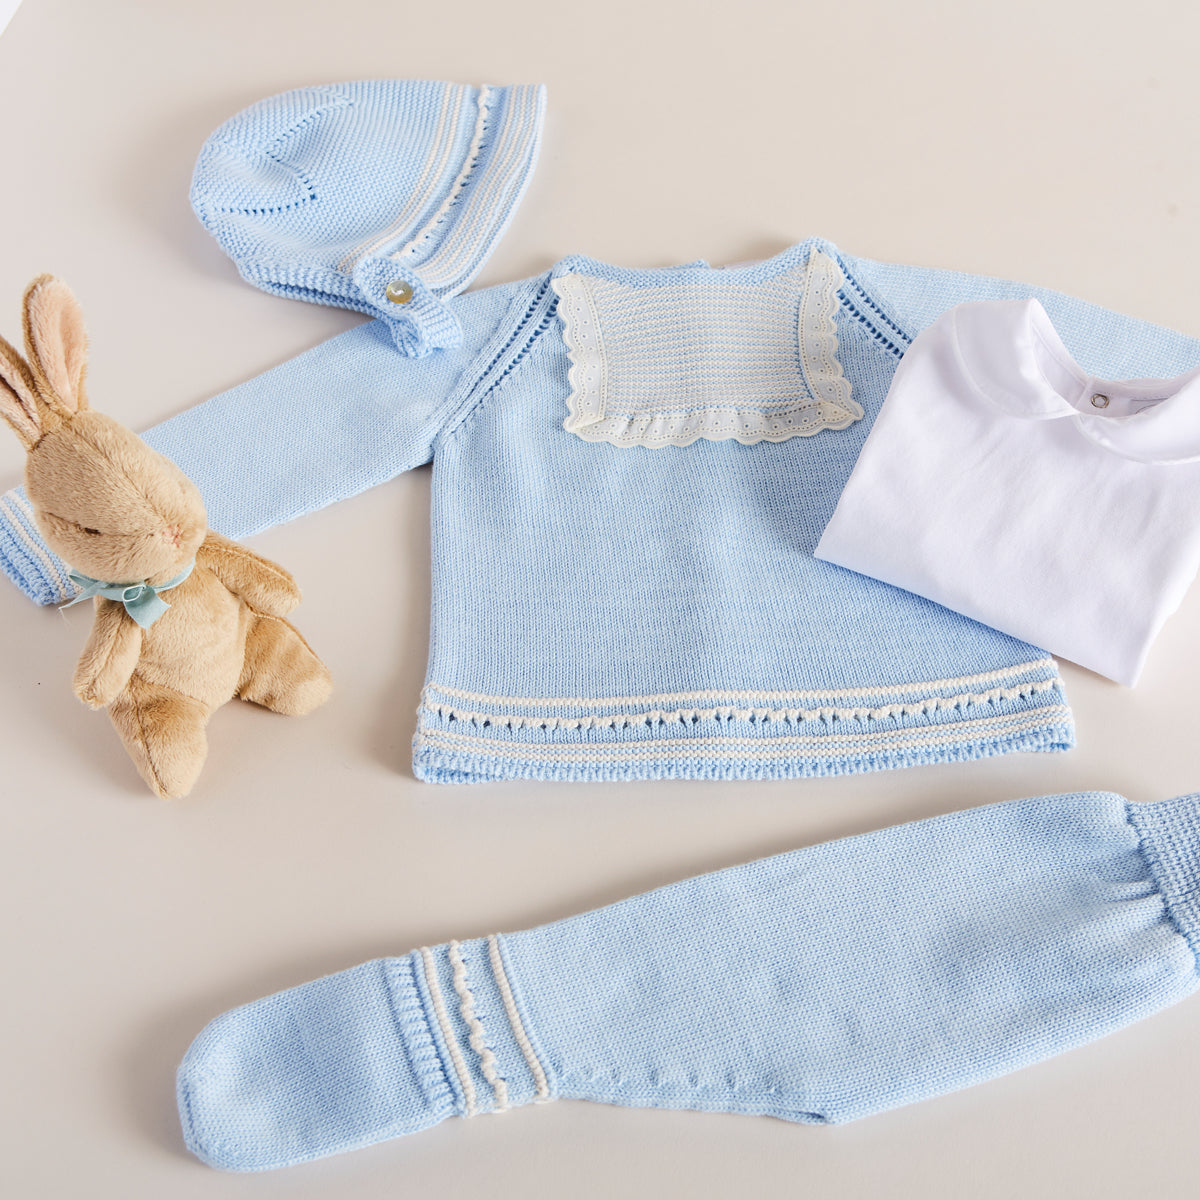 Delicate Blue Knitted Cotton Set with Lace Detail Knitwear  from Pepa London